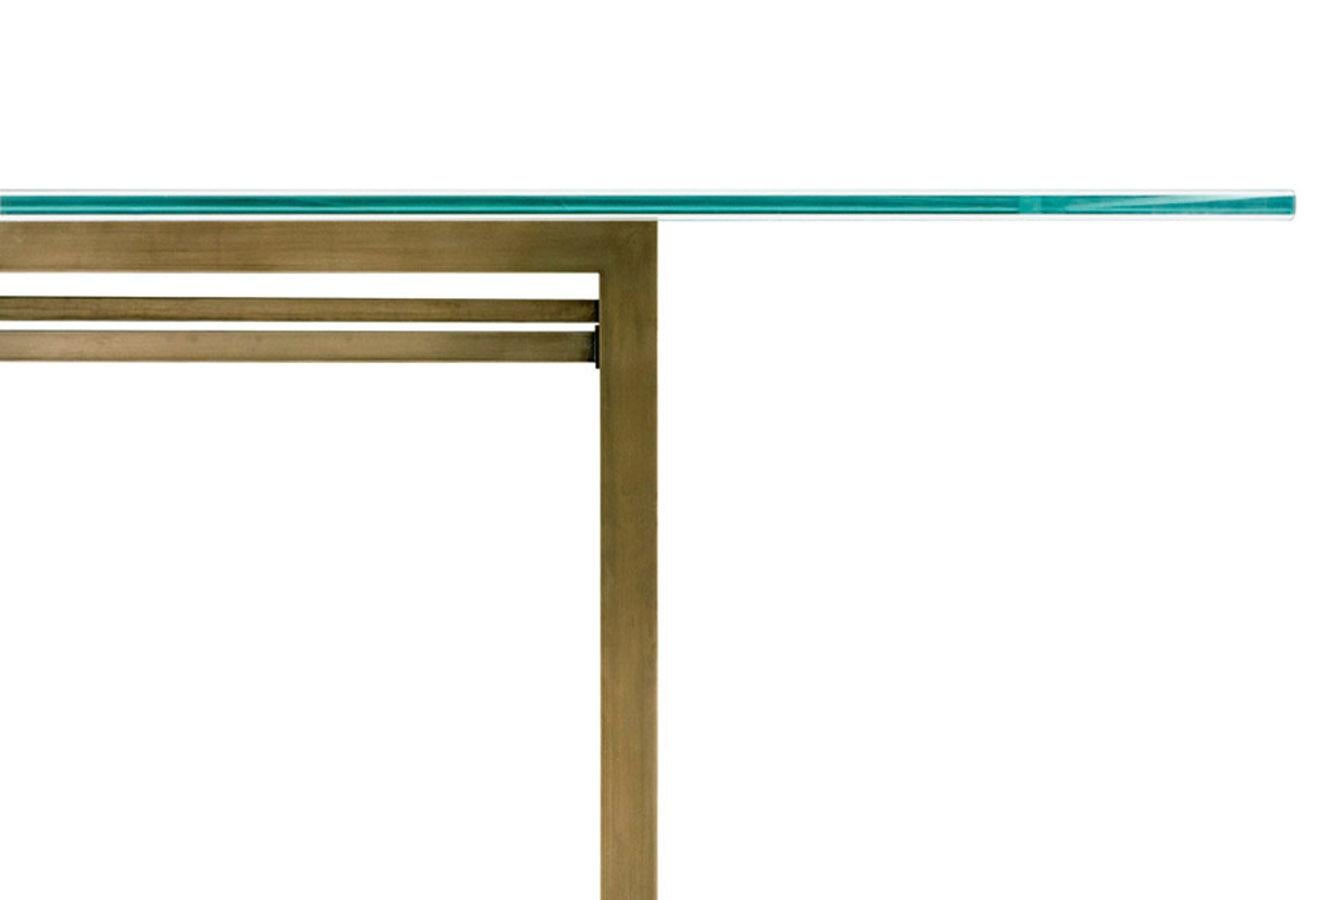 The 90° Glass & Metal Dining Table features a frame made of steel or brass angles and a rectangular glass top. 

Made to order and handcrafted in the USA. Frame available in a range of five metal finishes including stainless steel, patinated brass,